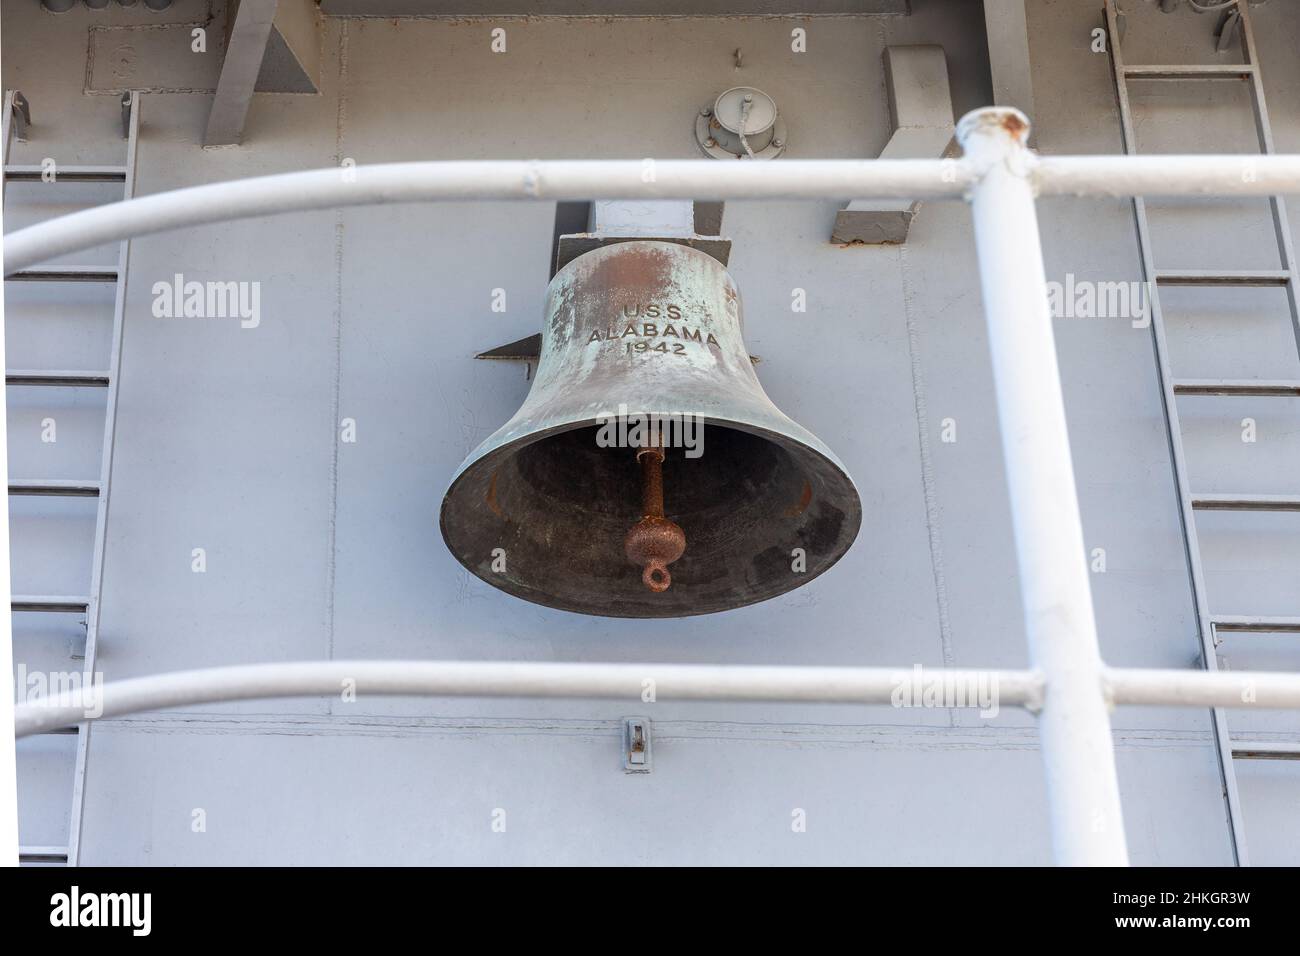 Ships bell on the USS Alabama (BB-60), a battleship that served during World War II.  Concepts could include history, war, defense, navy, other. Stock Photo